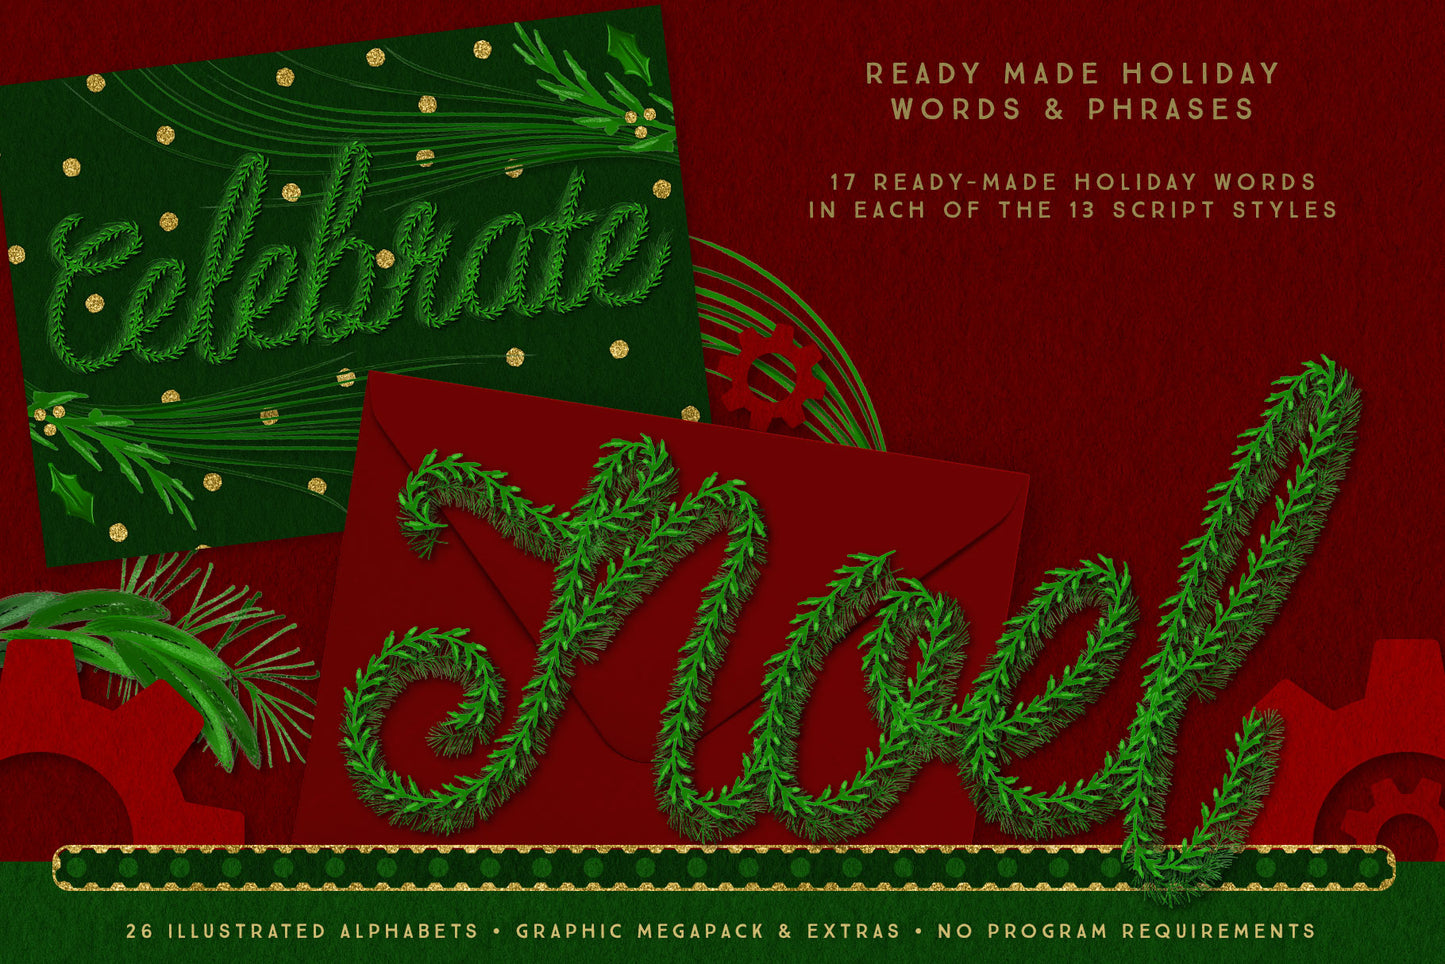 Luxe Christmas & Holiday Greenery Alphabets: ready made holiday phrases